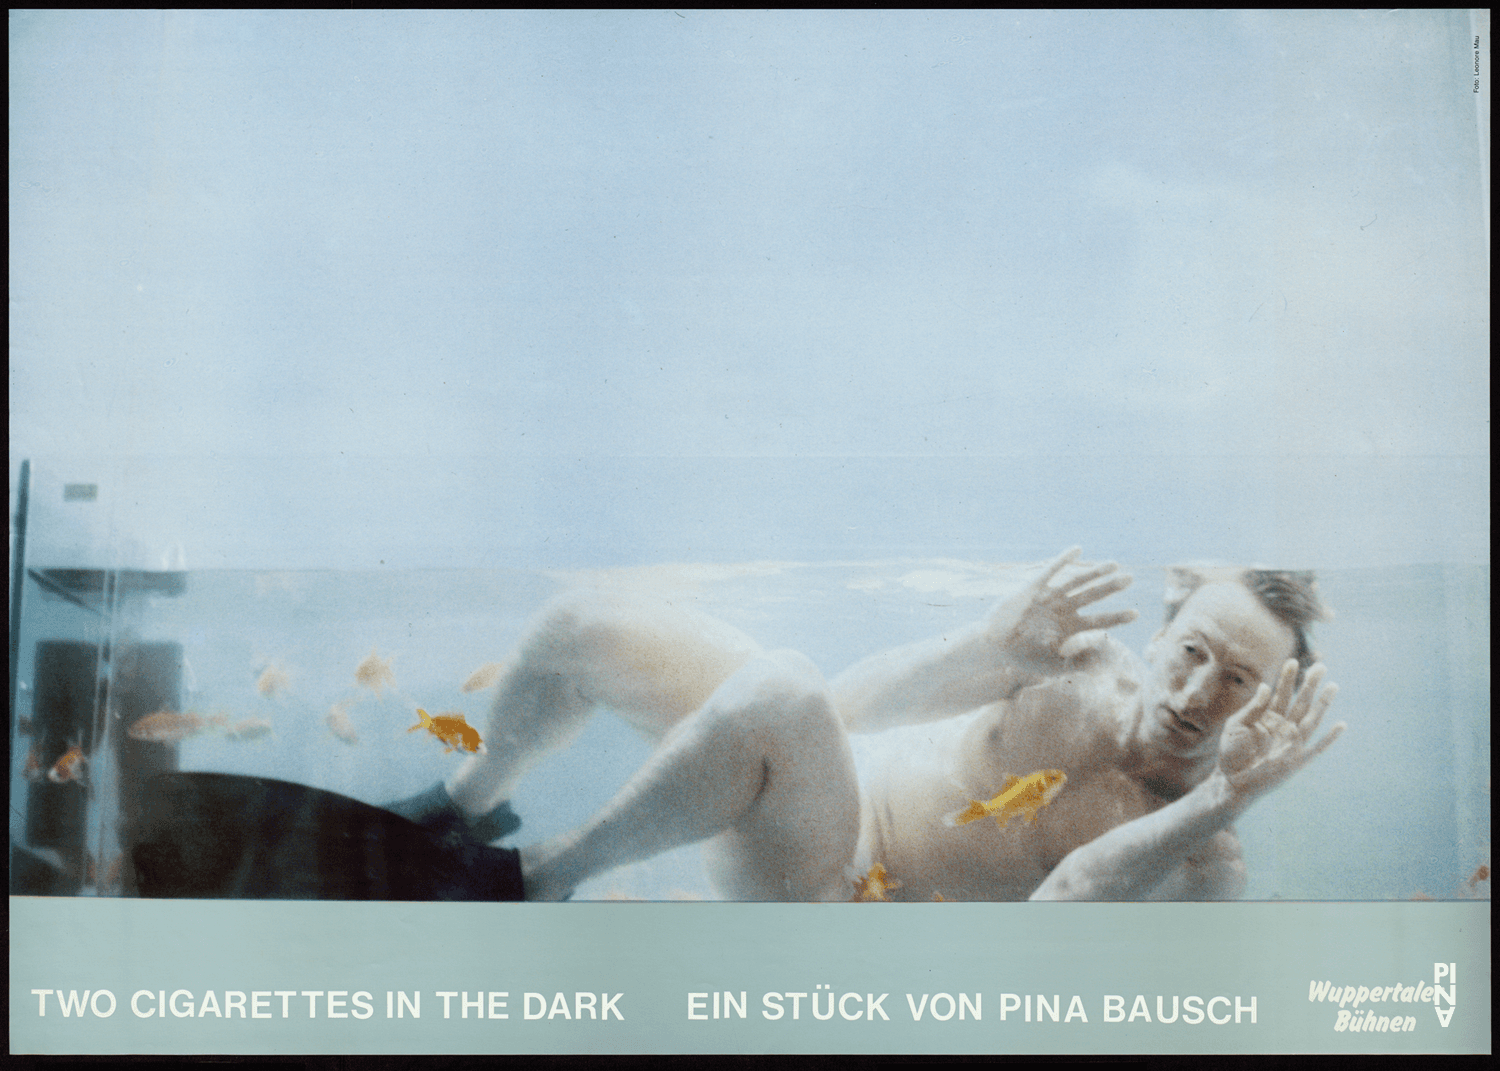 Poster for “Two Cigarettes in the Dark” by Pina Bausch